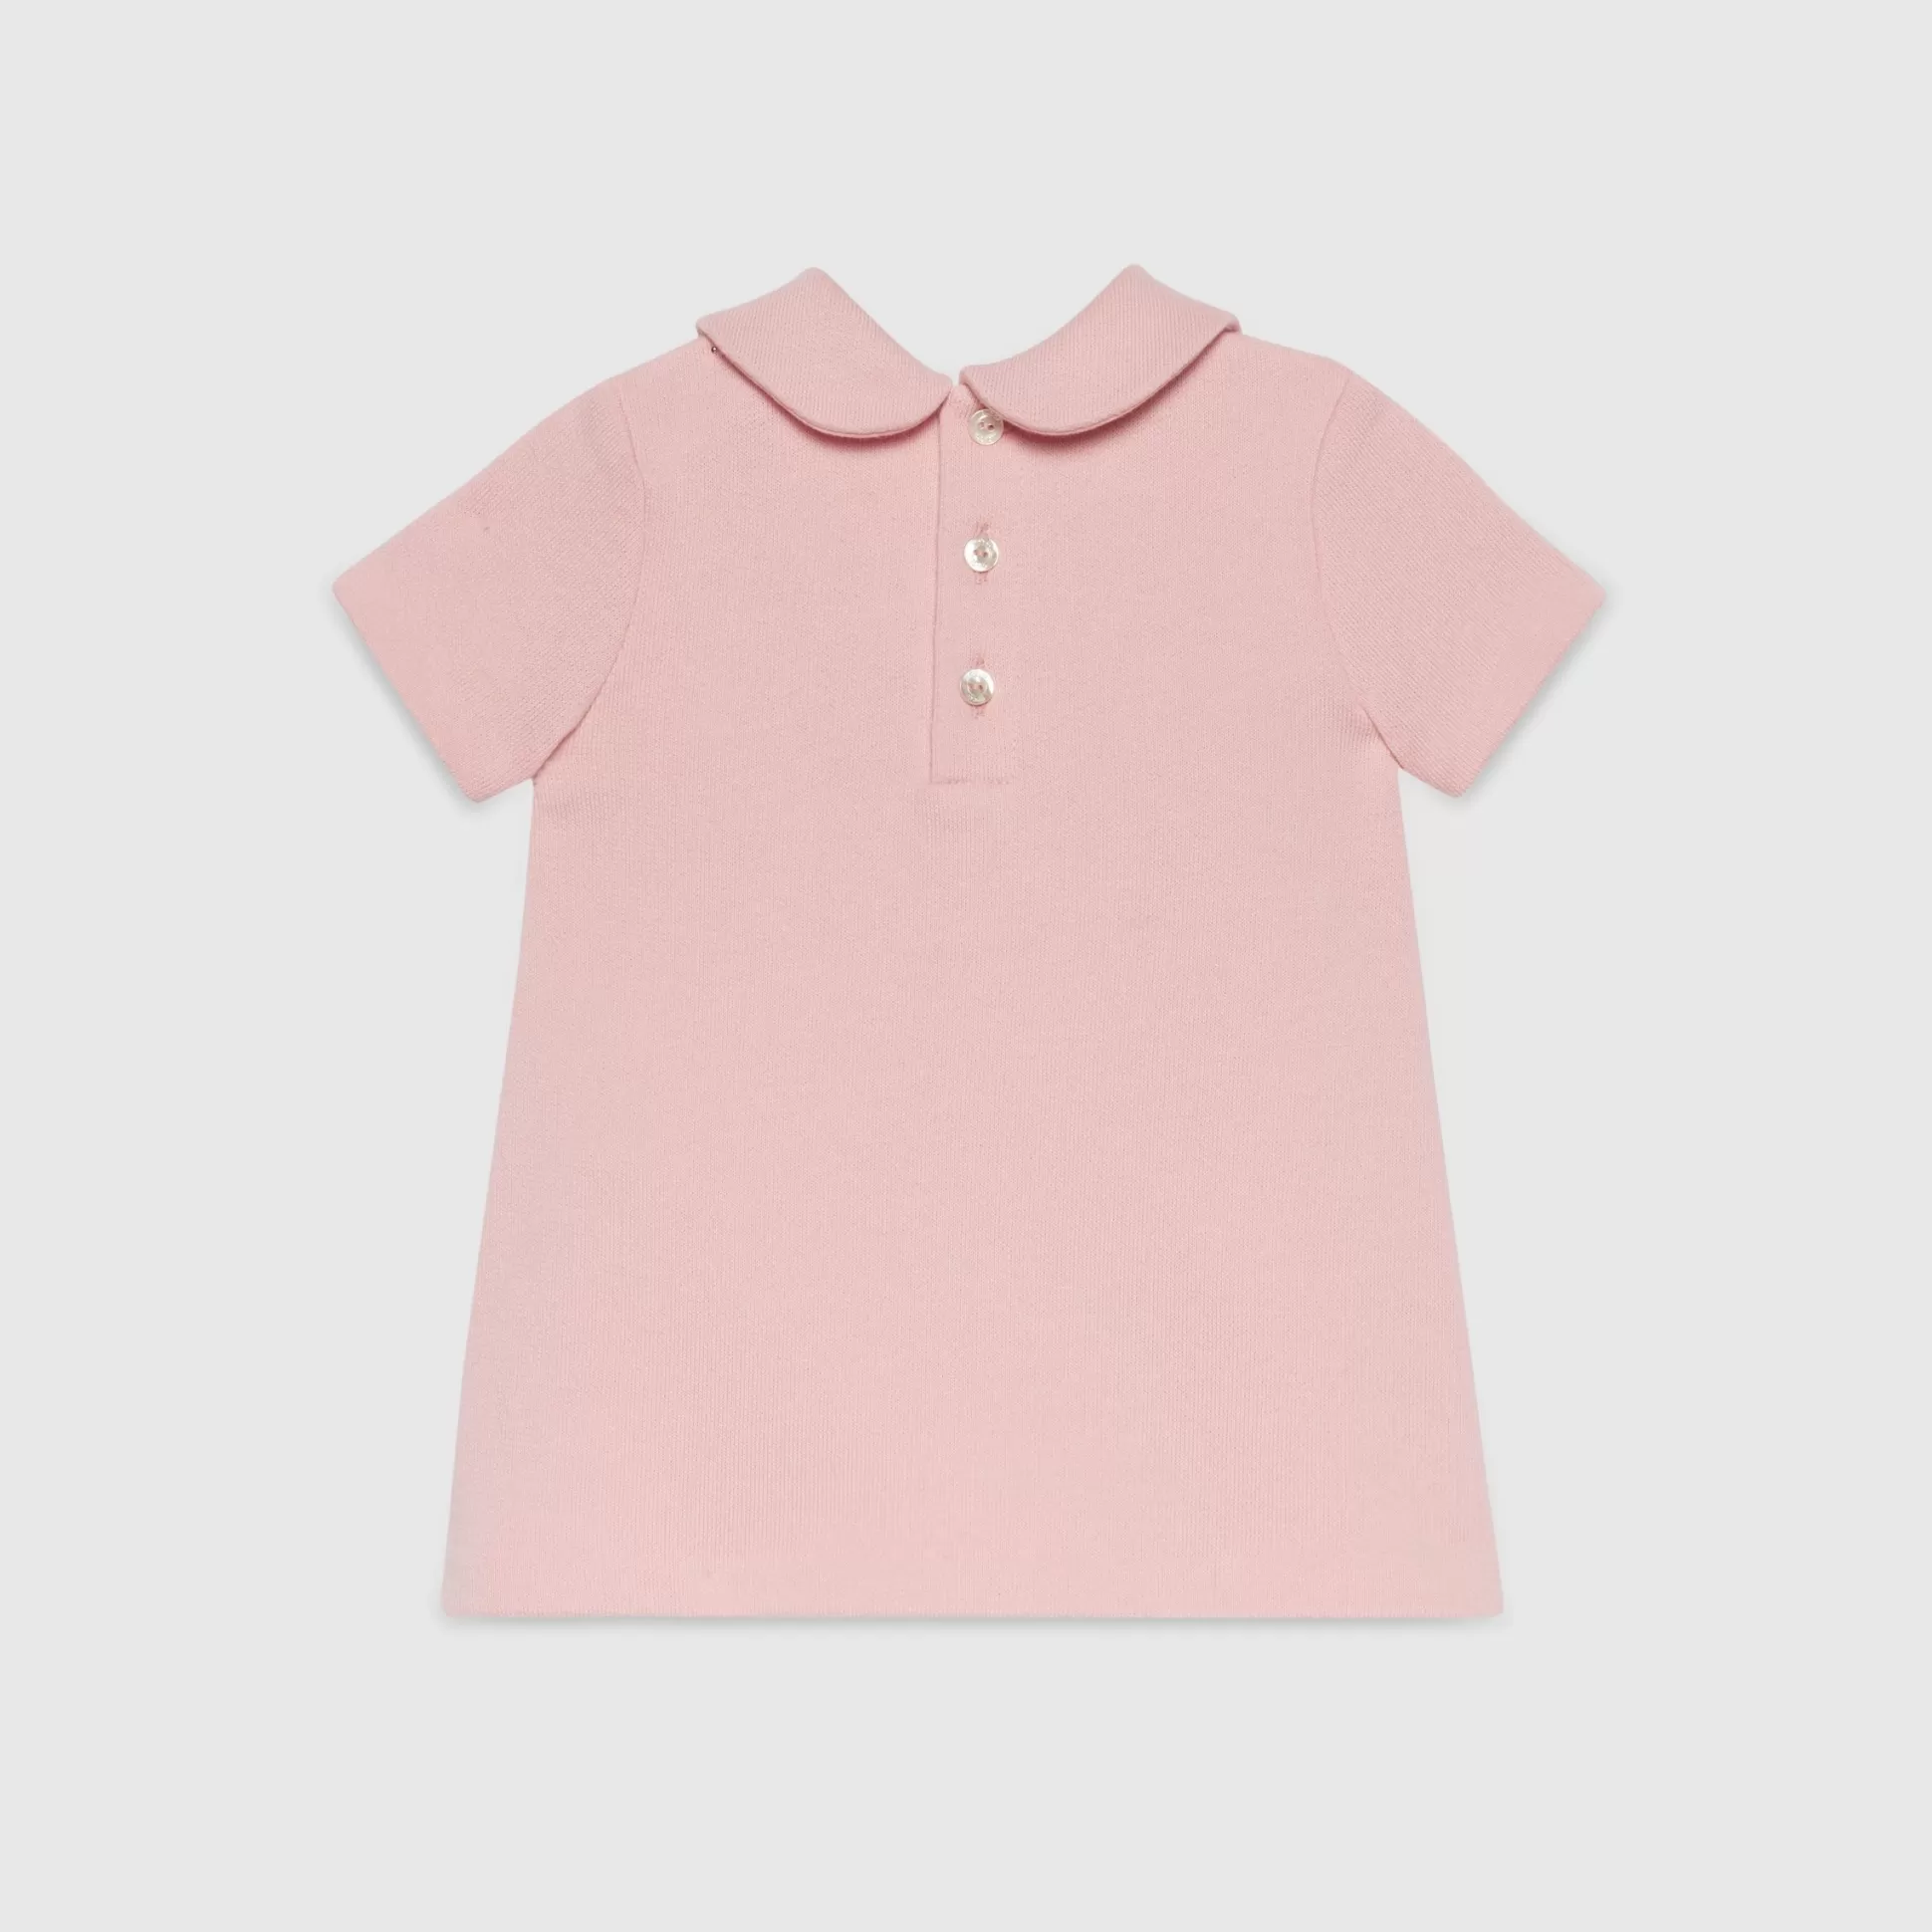 GUCCI Baby Cotton Jersey Dress With Embroidery-Children Girls (0-36 Months)